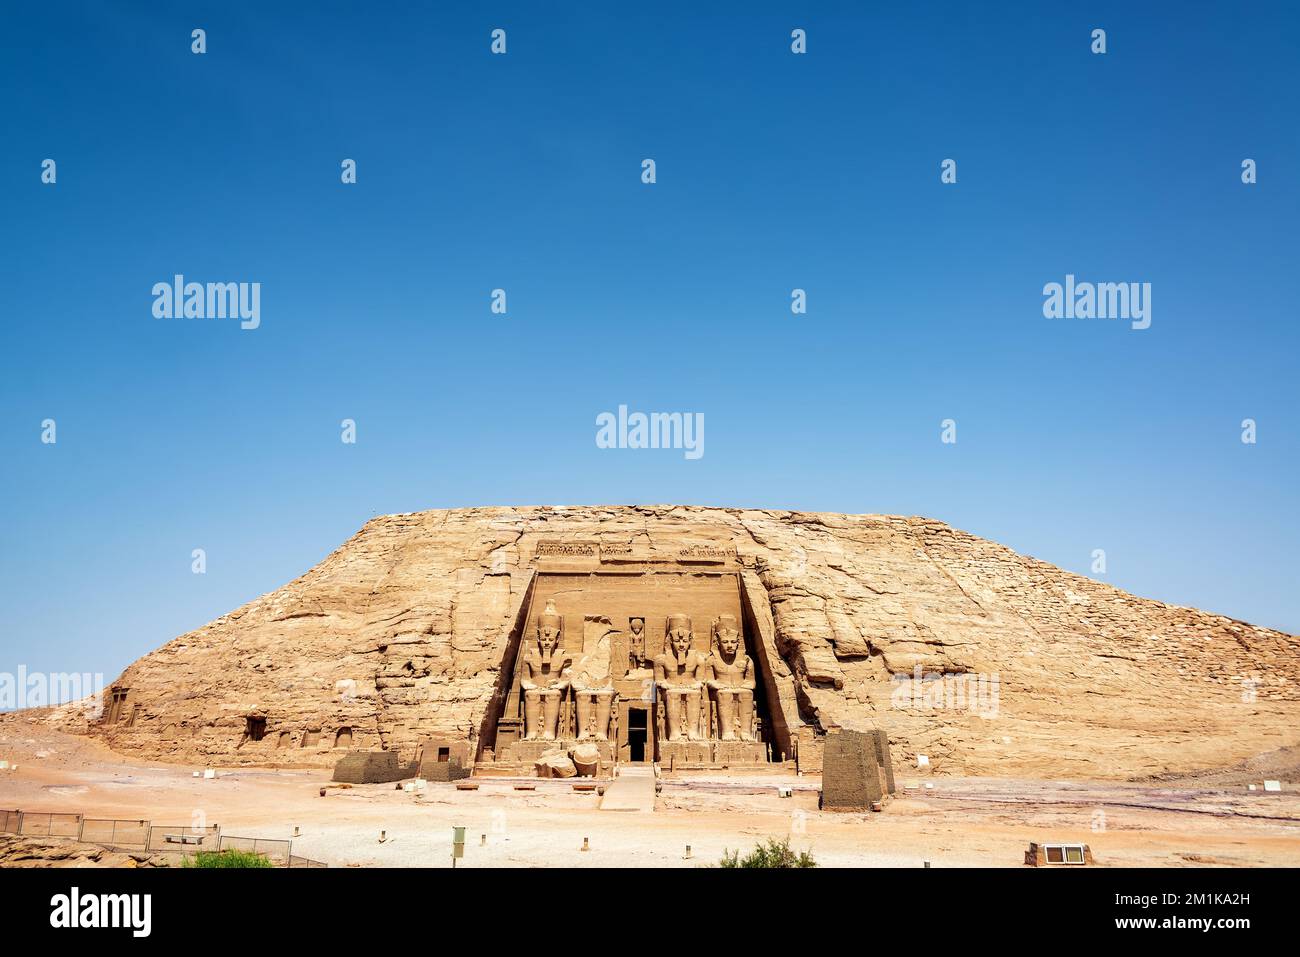 View of the temple of Ramses II at Abu Simbel, Egypt Stock Photo